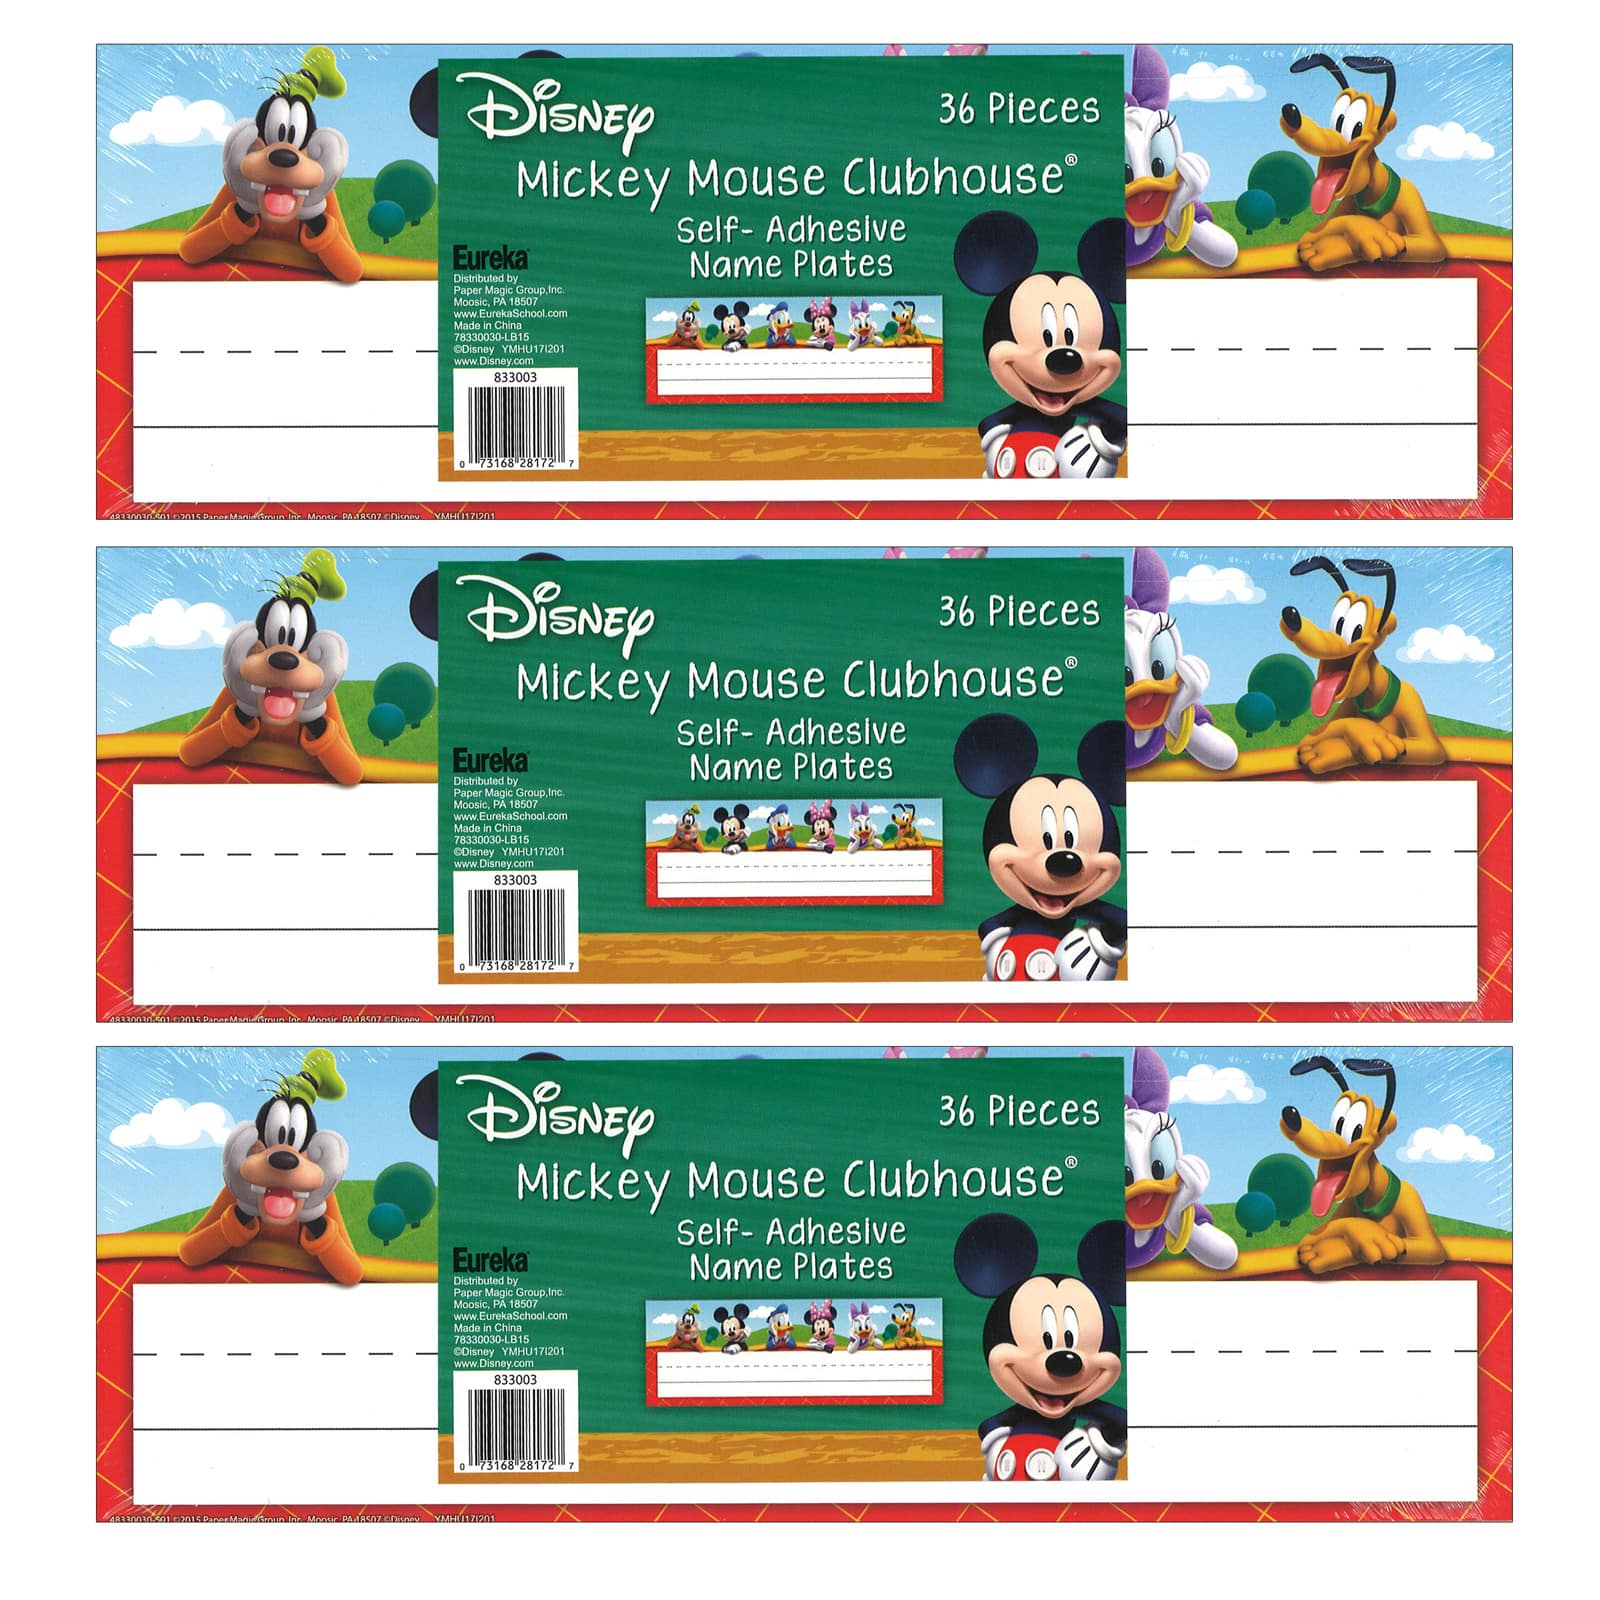 Find the Eureka® Mickey Mouse Clubhouse® Self-Adhesive Name Plates, 3 Packs of 36 at Michaels.com